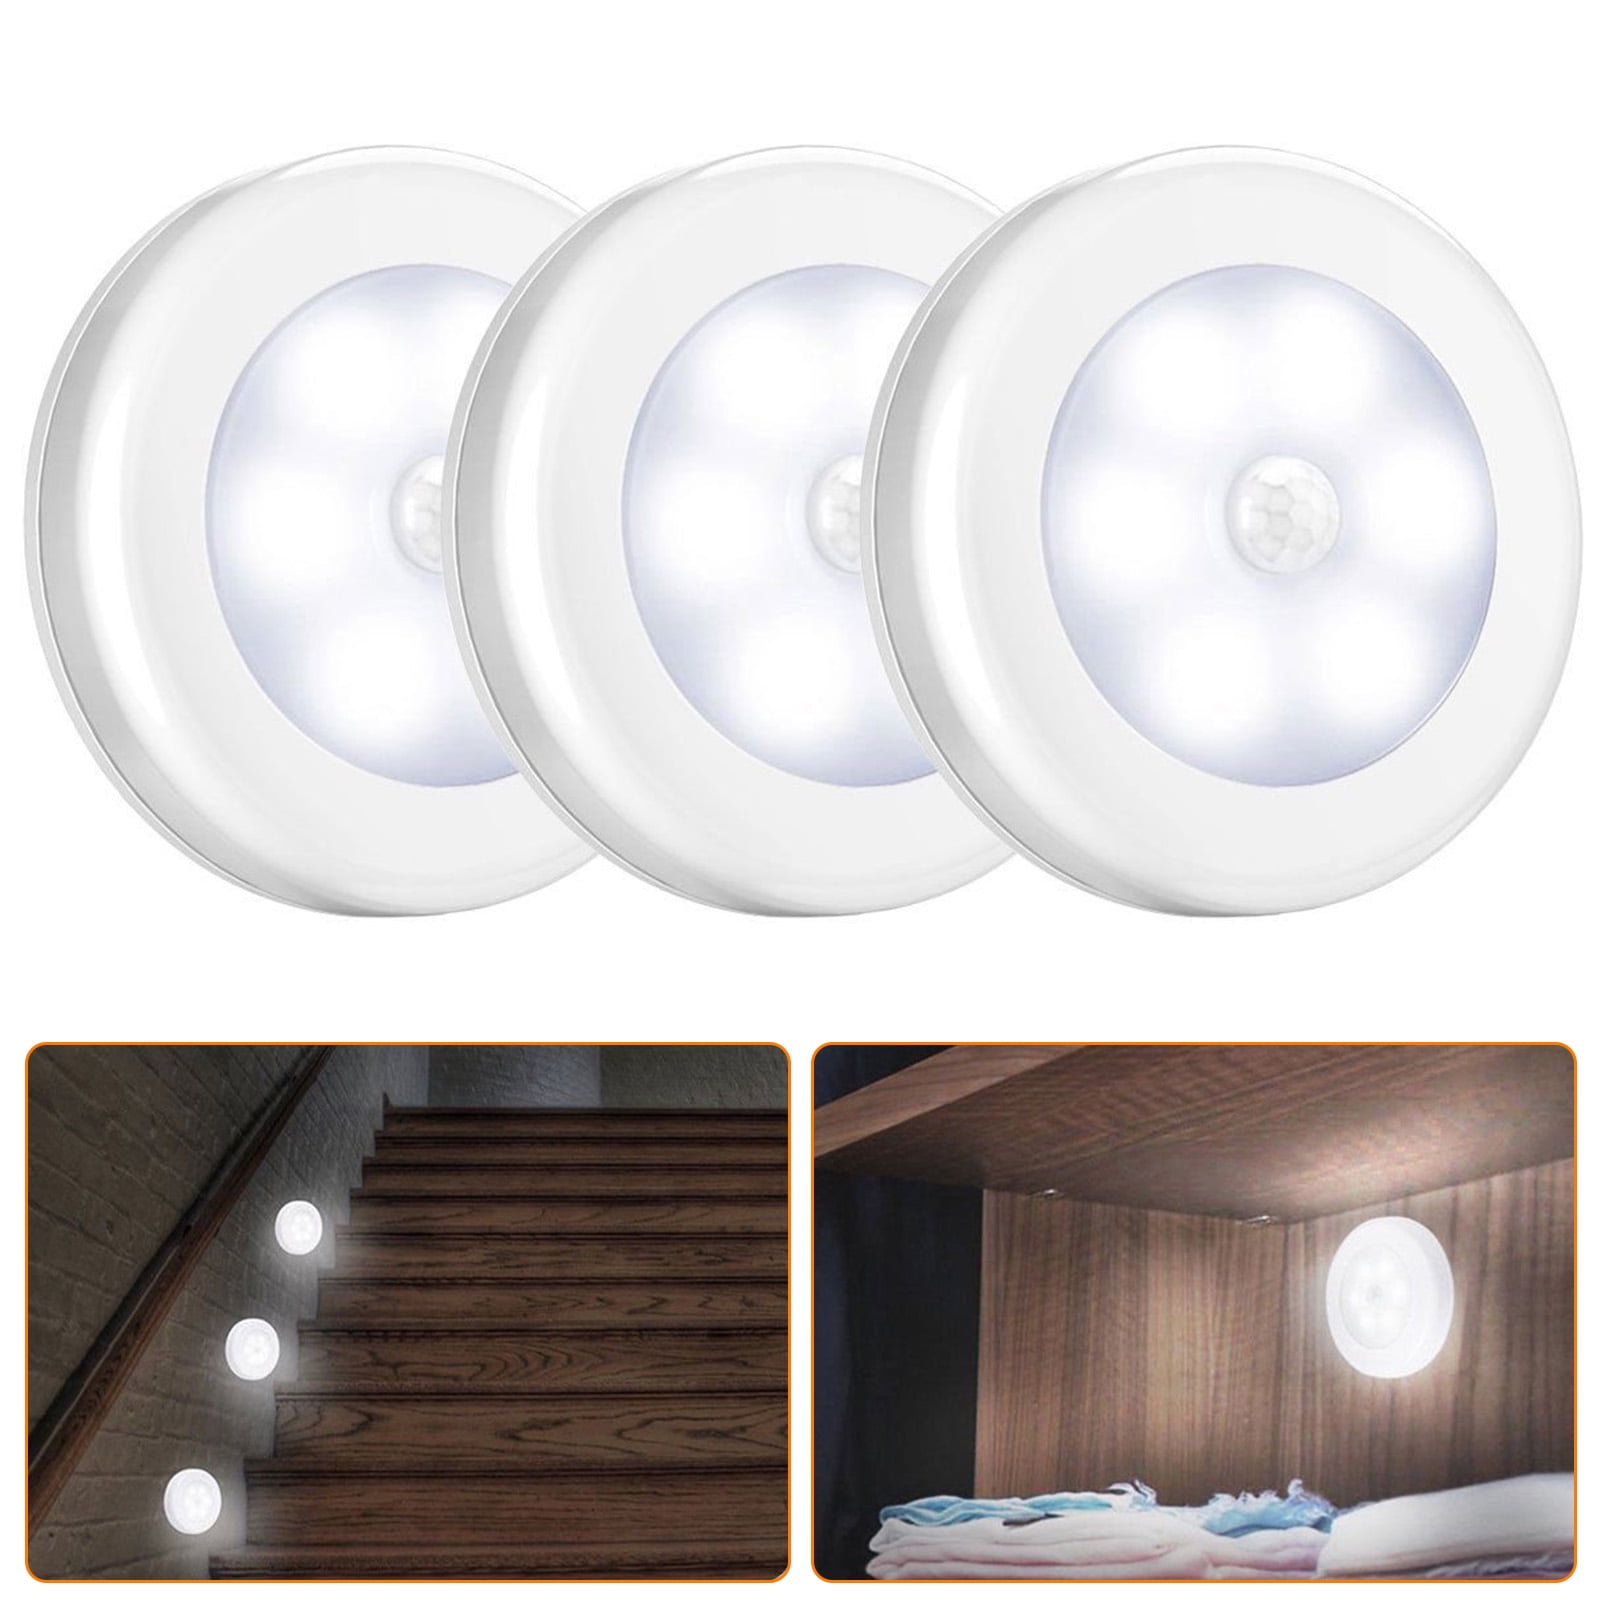 3LED Night Light Touch Button Lighting Motion Detector Wireless Lamp 